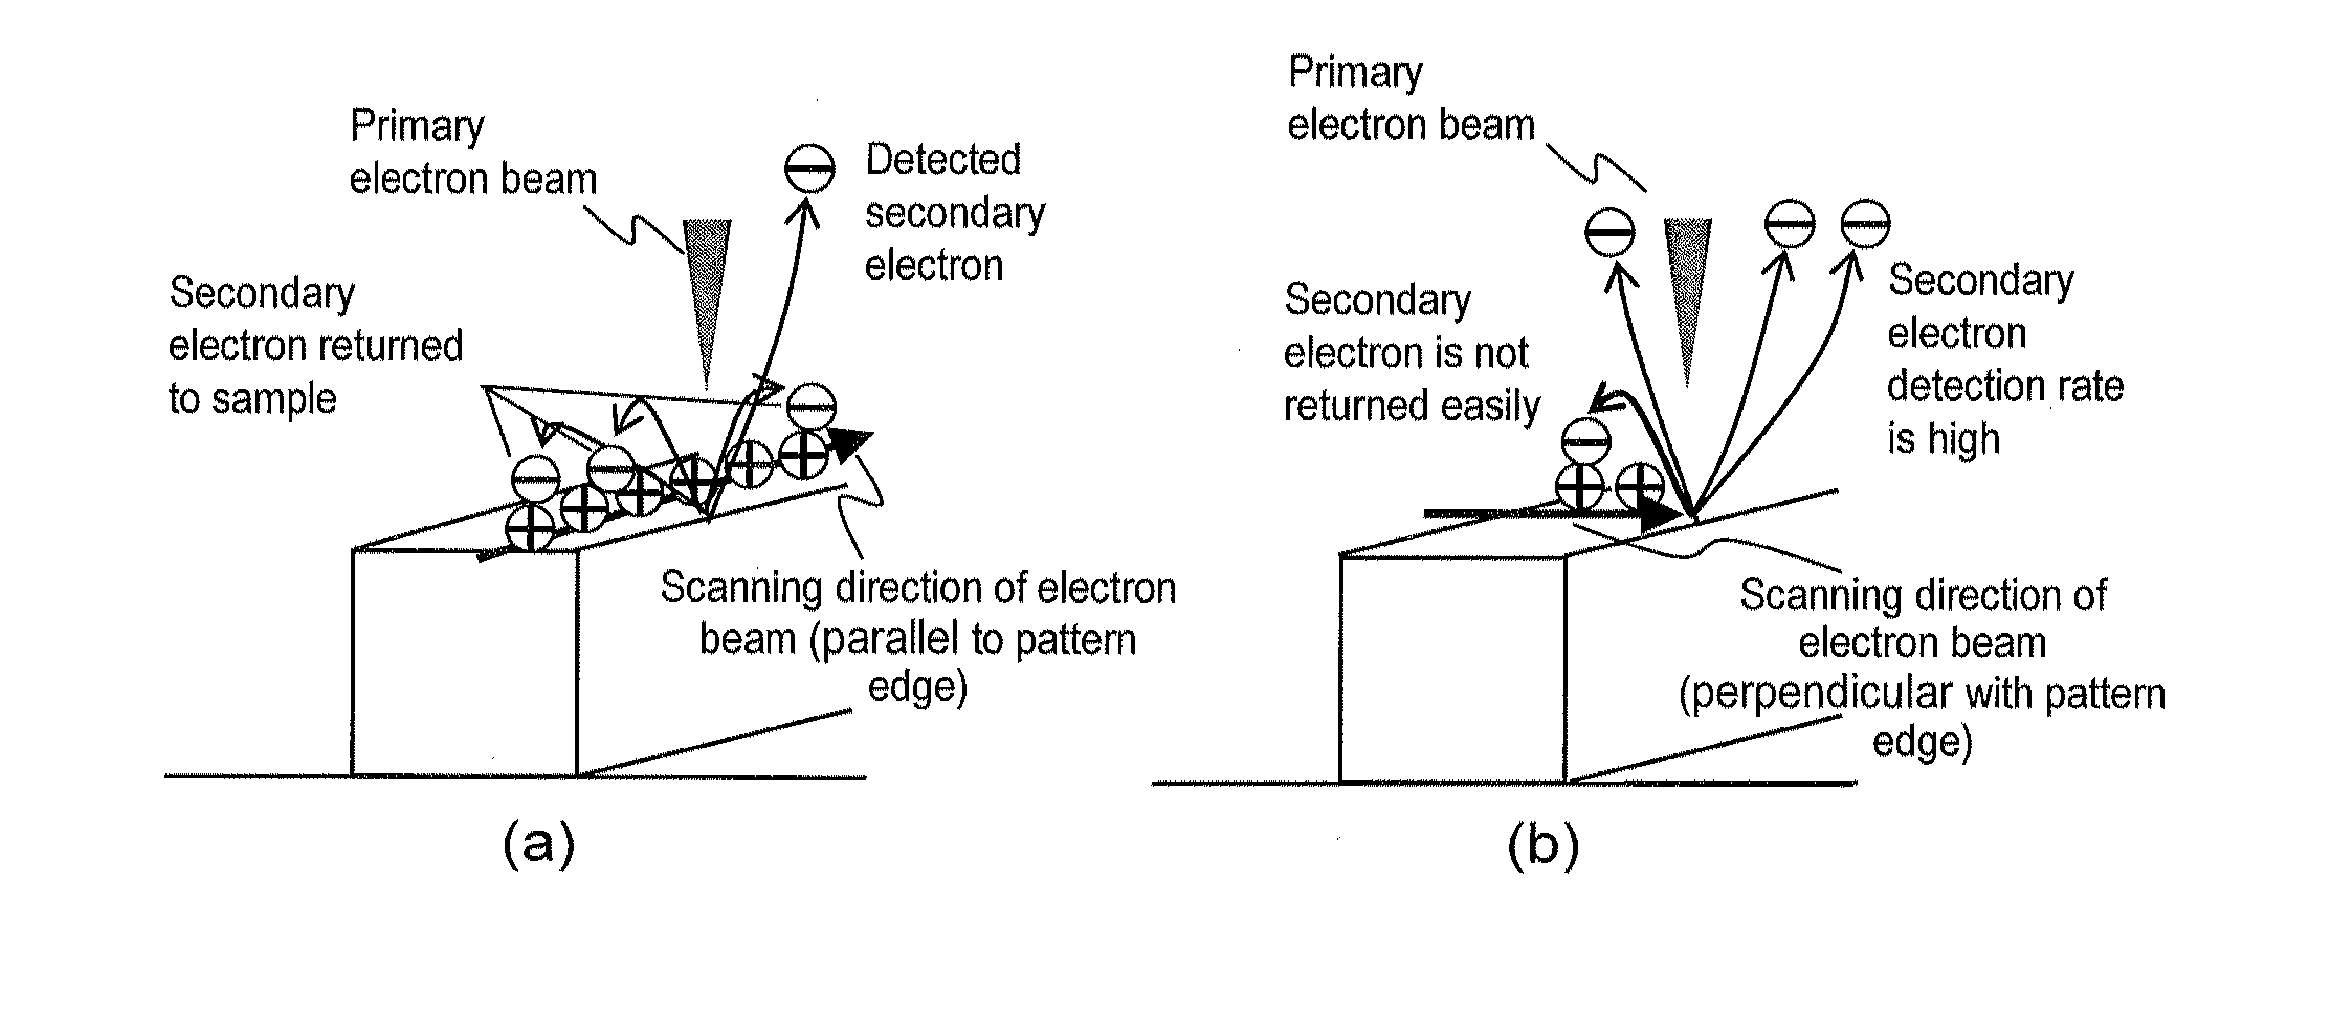 Scanning electron microscope and sample observation method